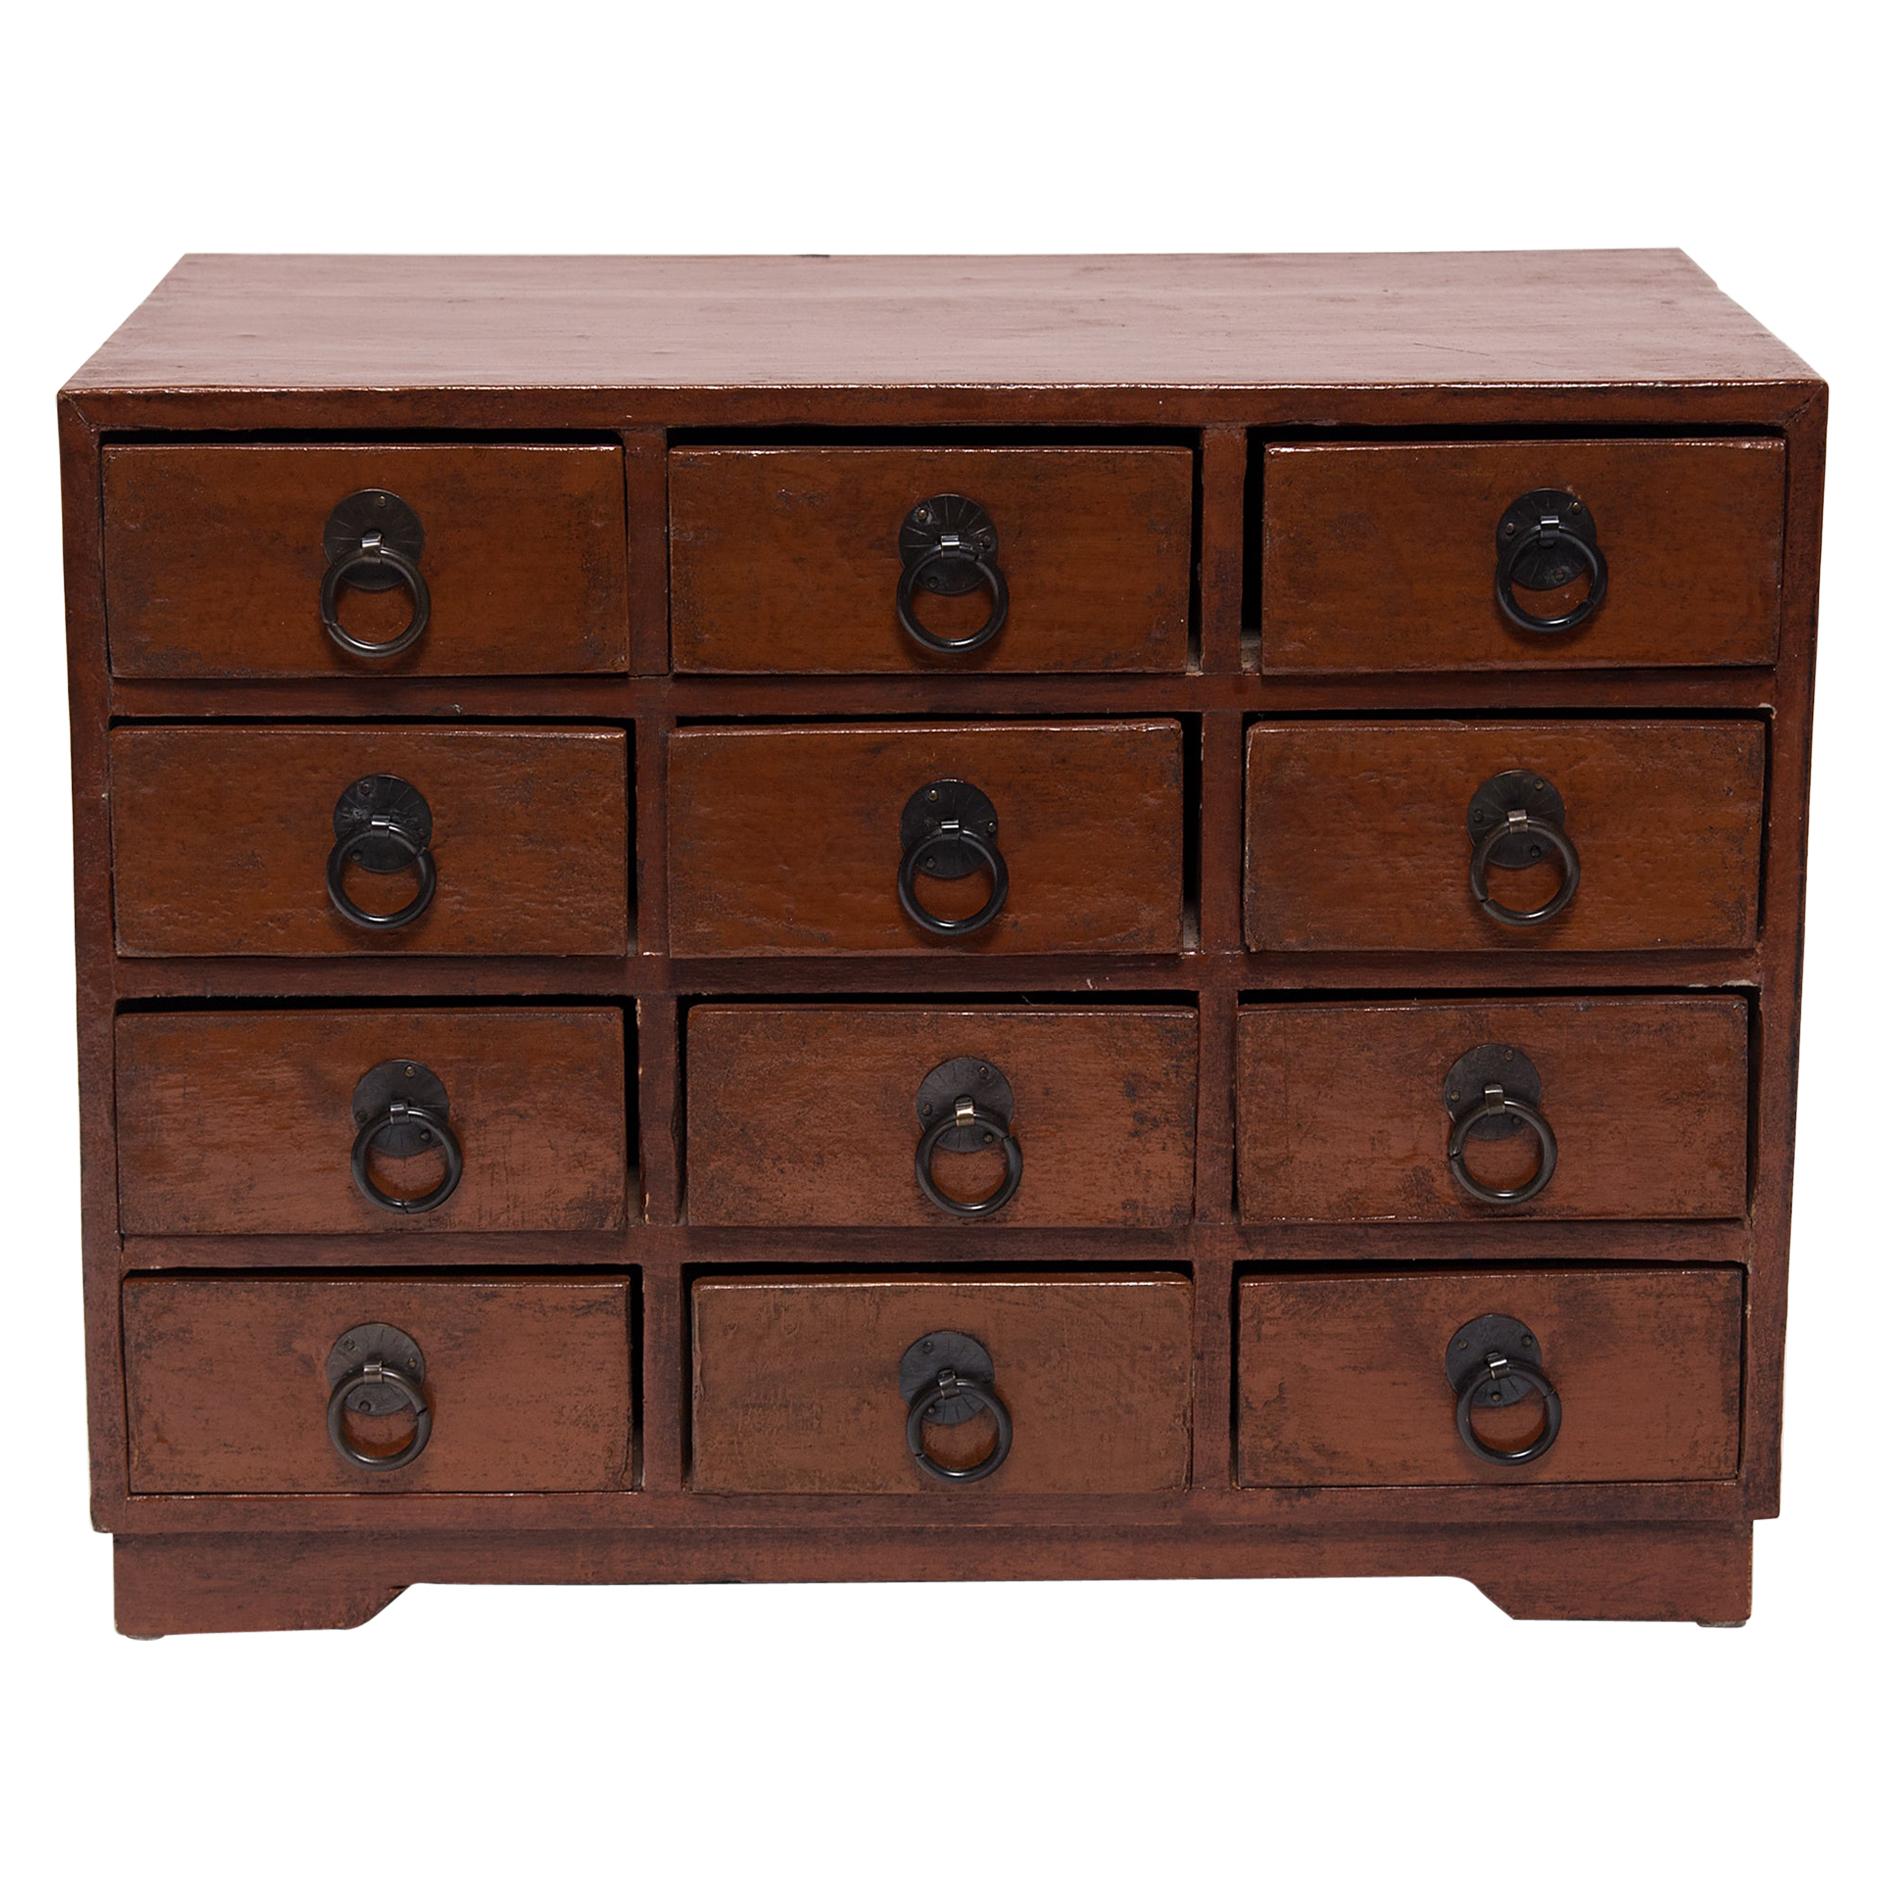 Petite Chinese Apothecary Chest